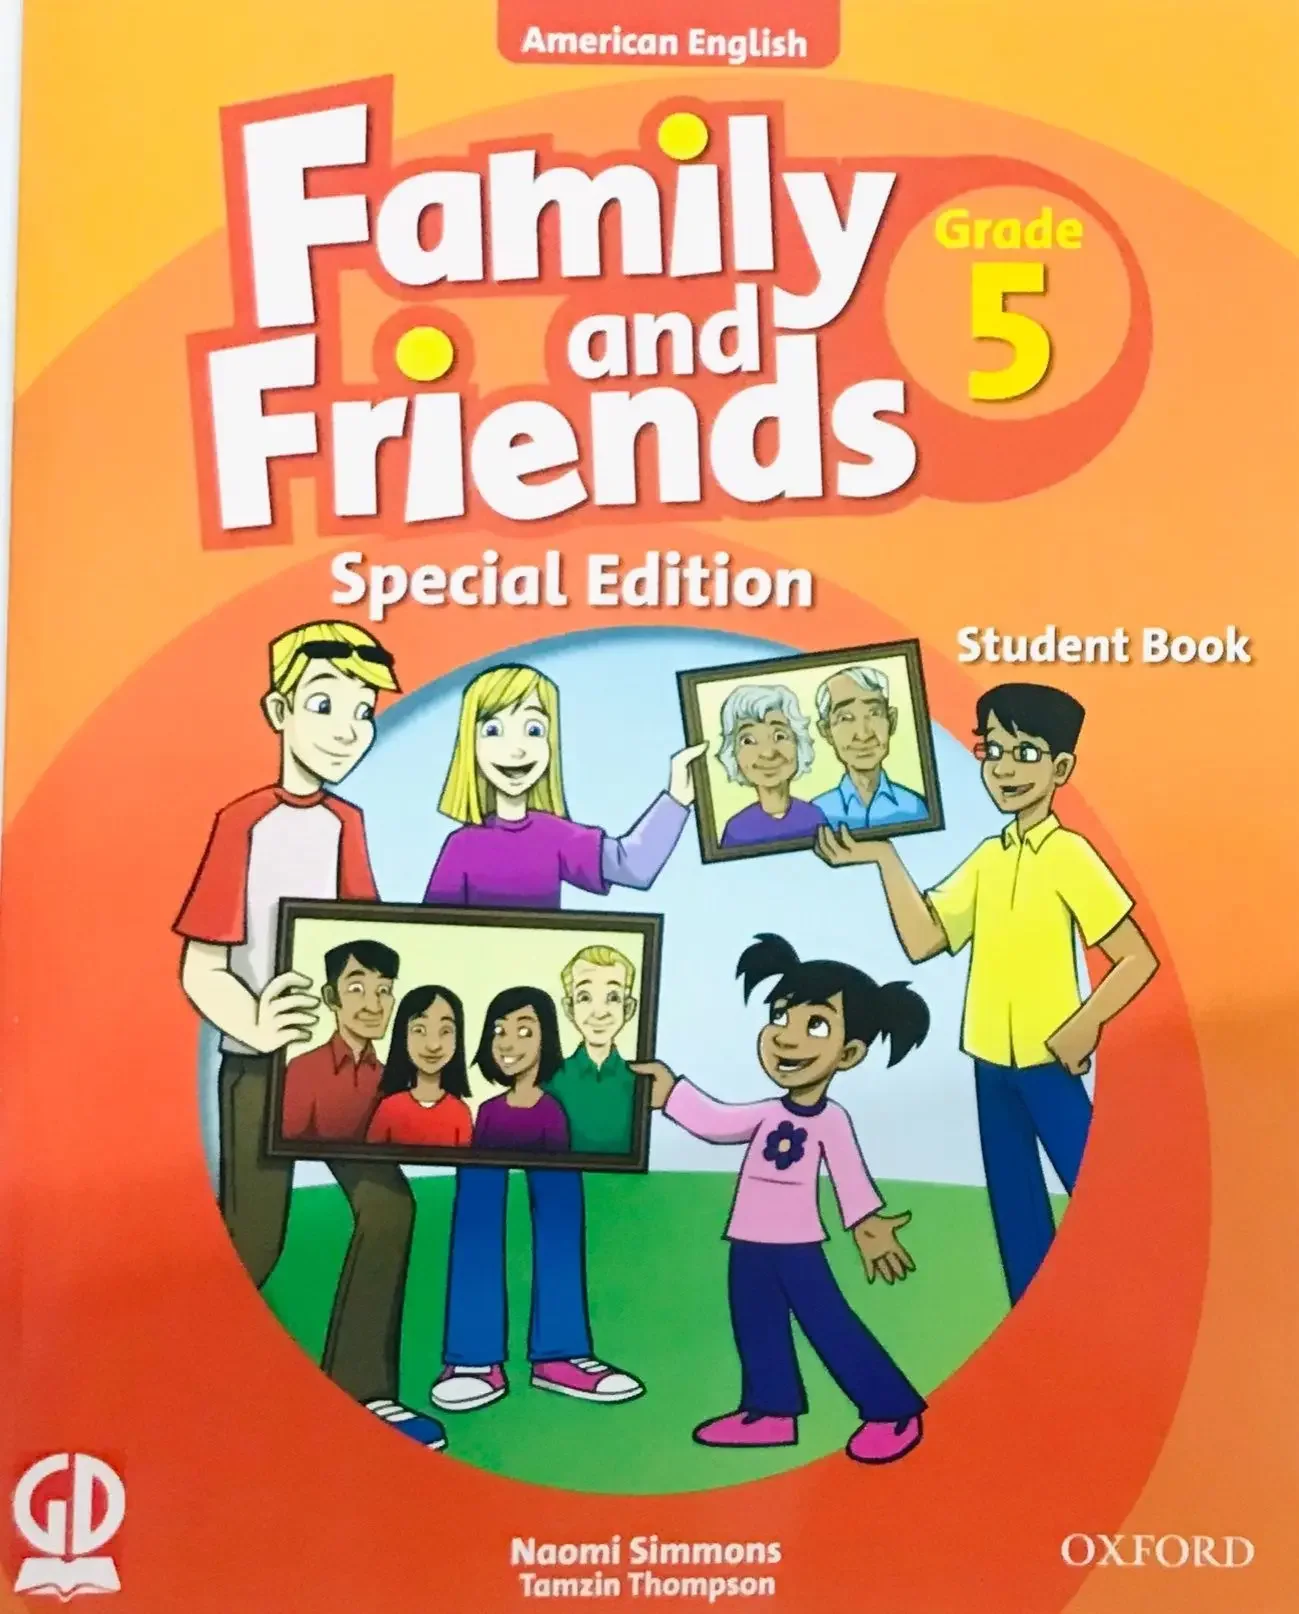 Bộ Family and Friends 5